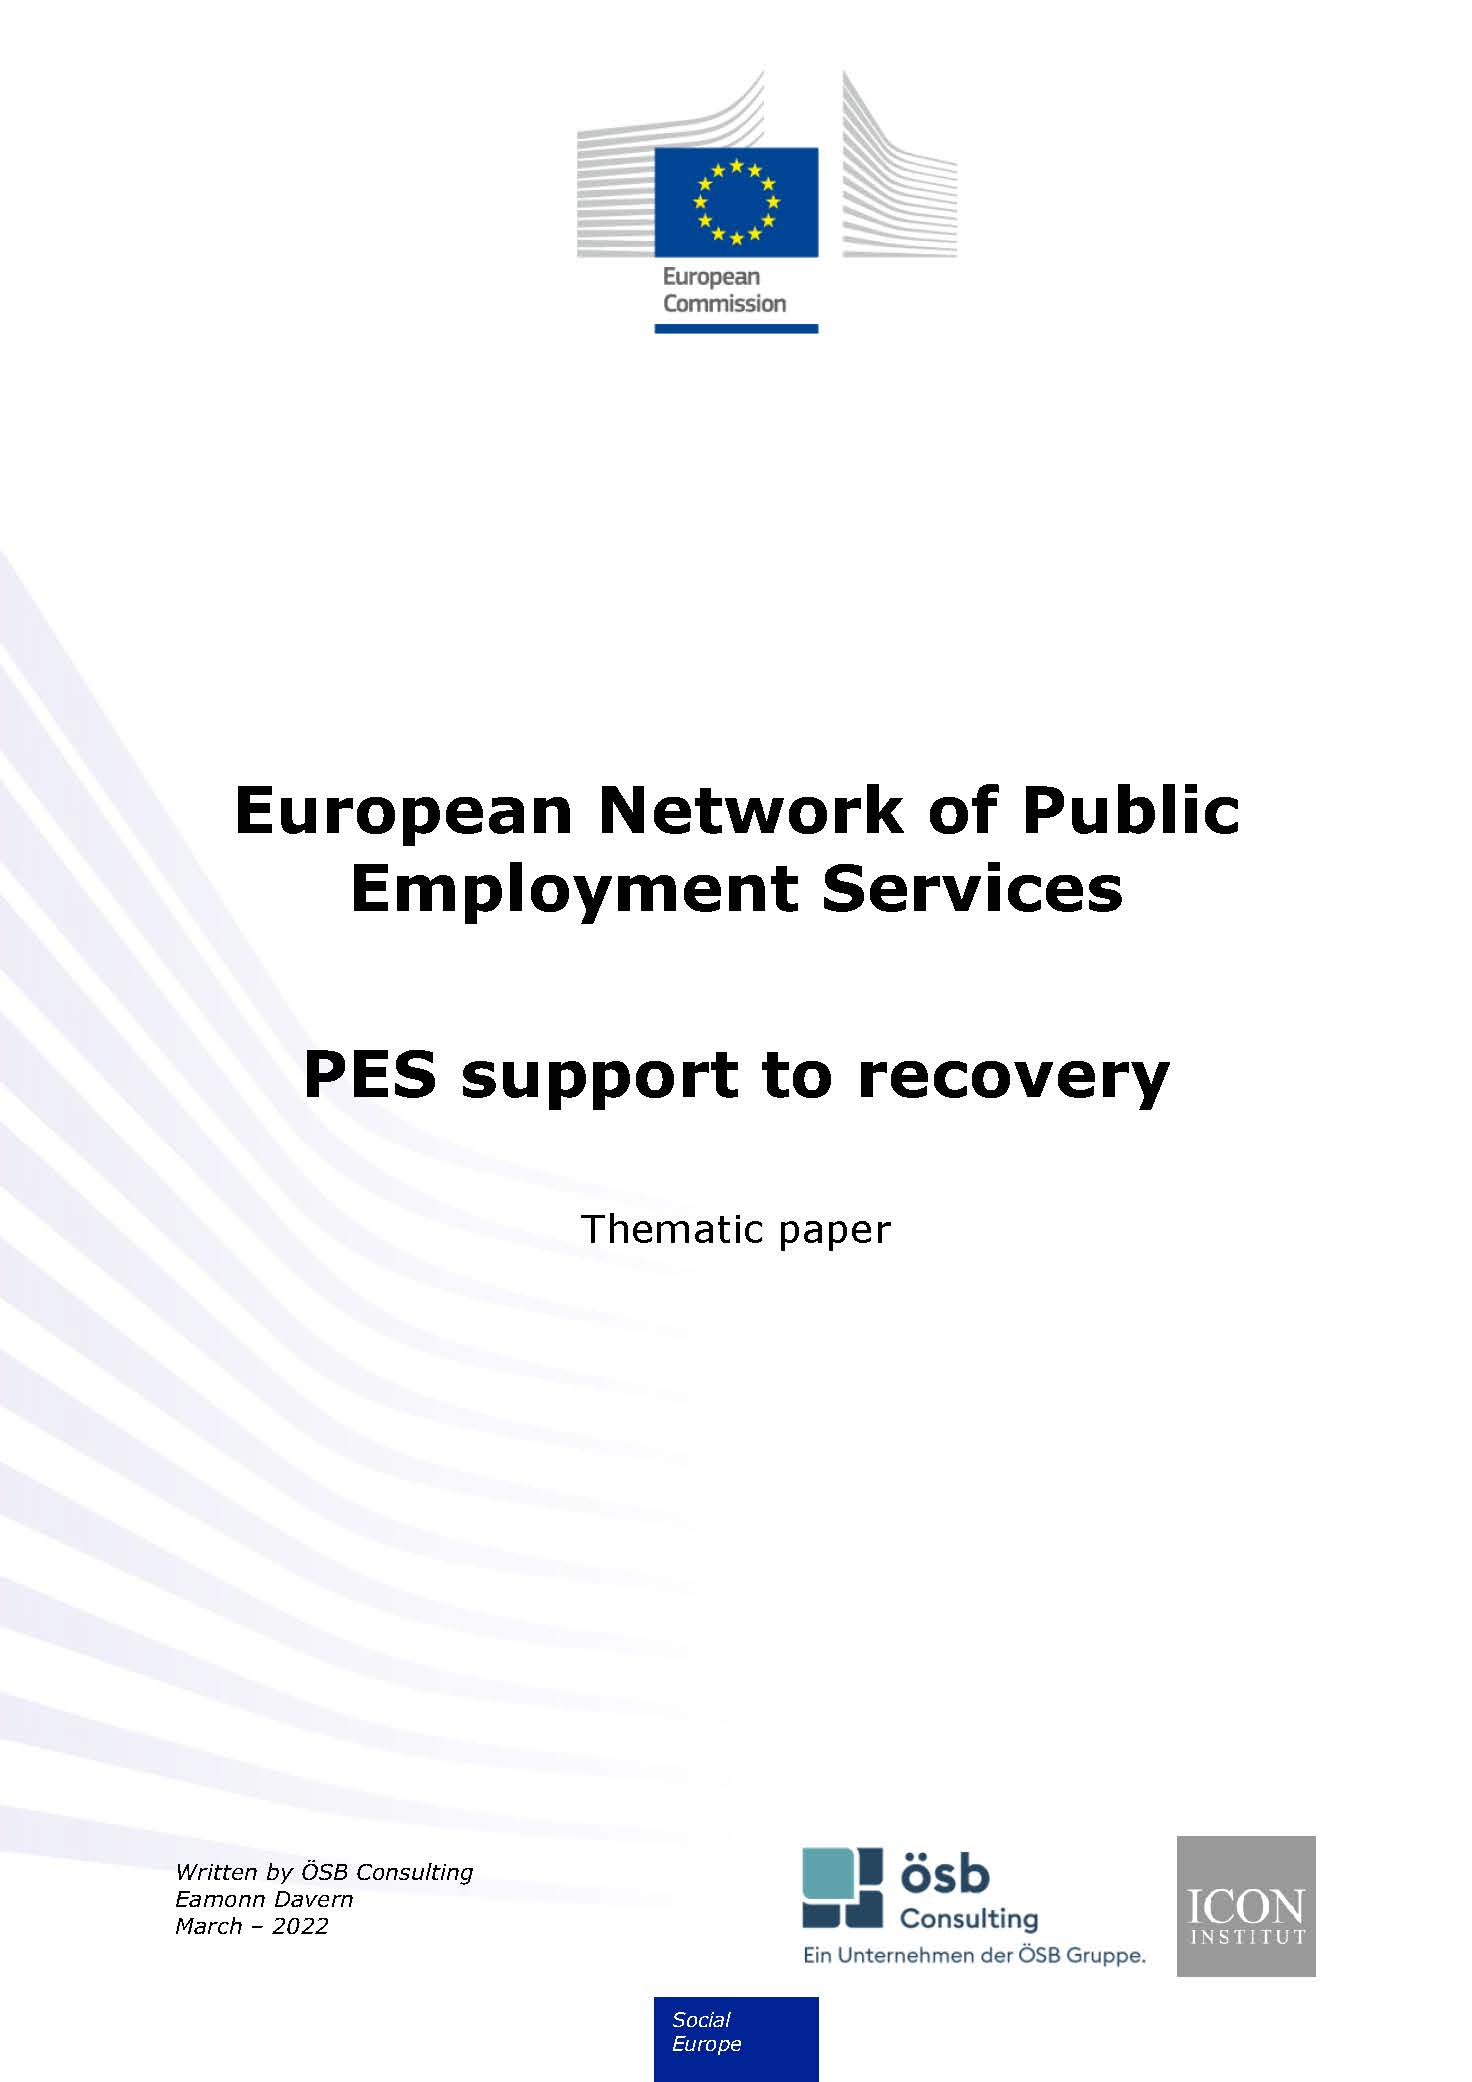 PES support to recovery